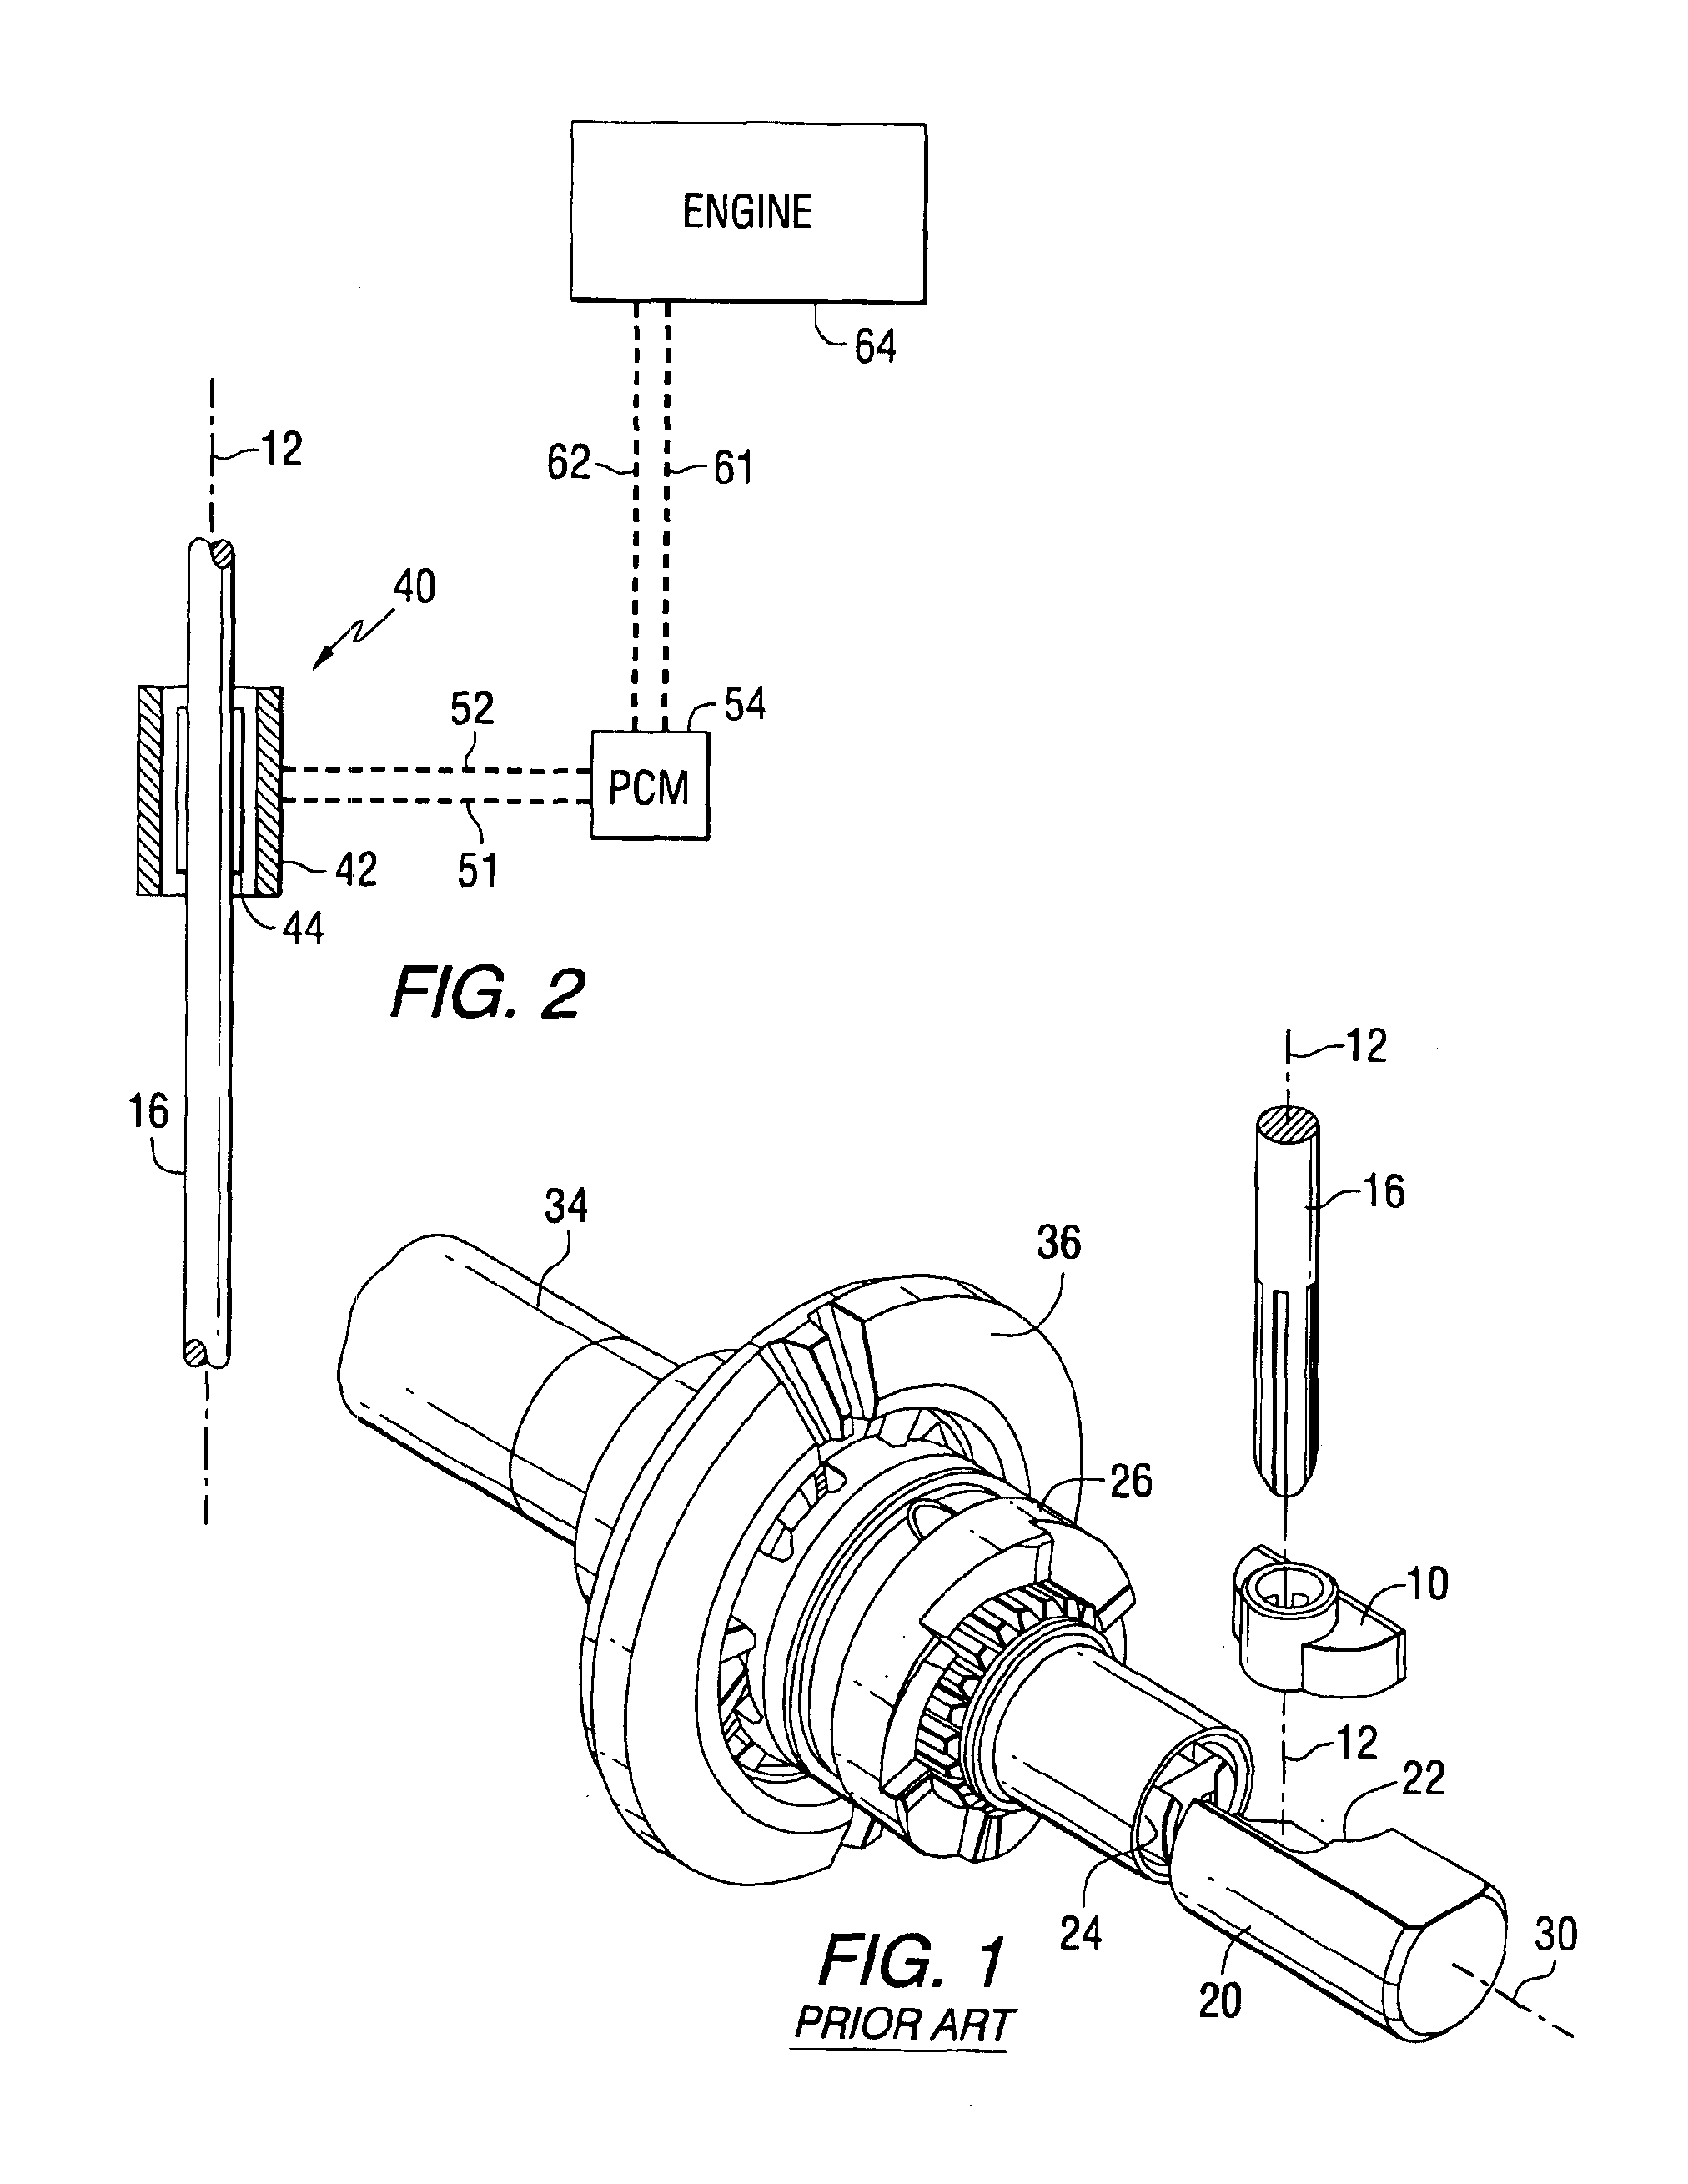 Method for controlling a shift procedure for a marine propulsion system